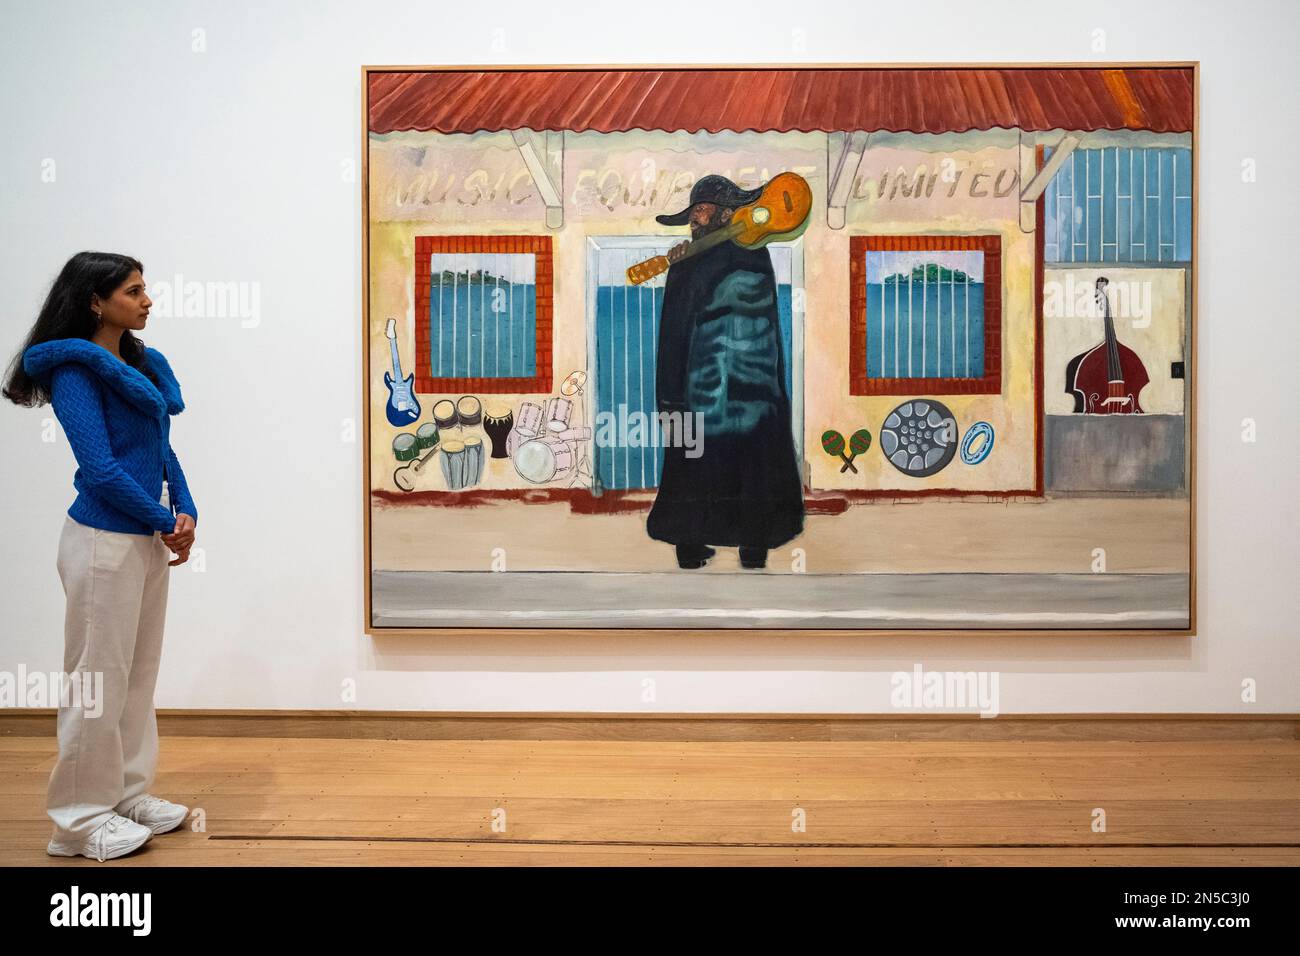 https://c8.alamy.com/comp/2N5C3J0/london-uk-9-february-2023-a-staff-member-views-music-shop-2019-23-by-peter-doig-at-a-preview-at-the-courtauld-gallery-of-the-morgan-stanley-exhibition-peter-doig-presenting-new-and-recent-works-by-peter-doig-including-paintings-created-since-the-artists-move-from-trinidad-to-london-in-2021-the-exhibition-runs-10-february-to-29-may-2023-credit-stephen-chung-alamy-live-news-2N5C3J0.jpg